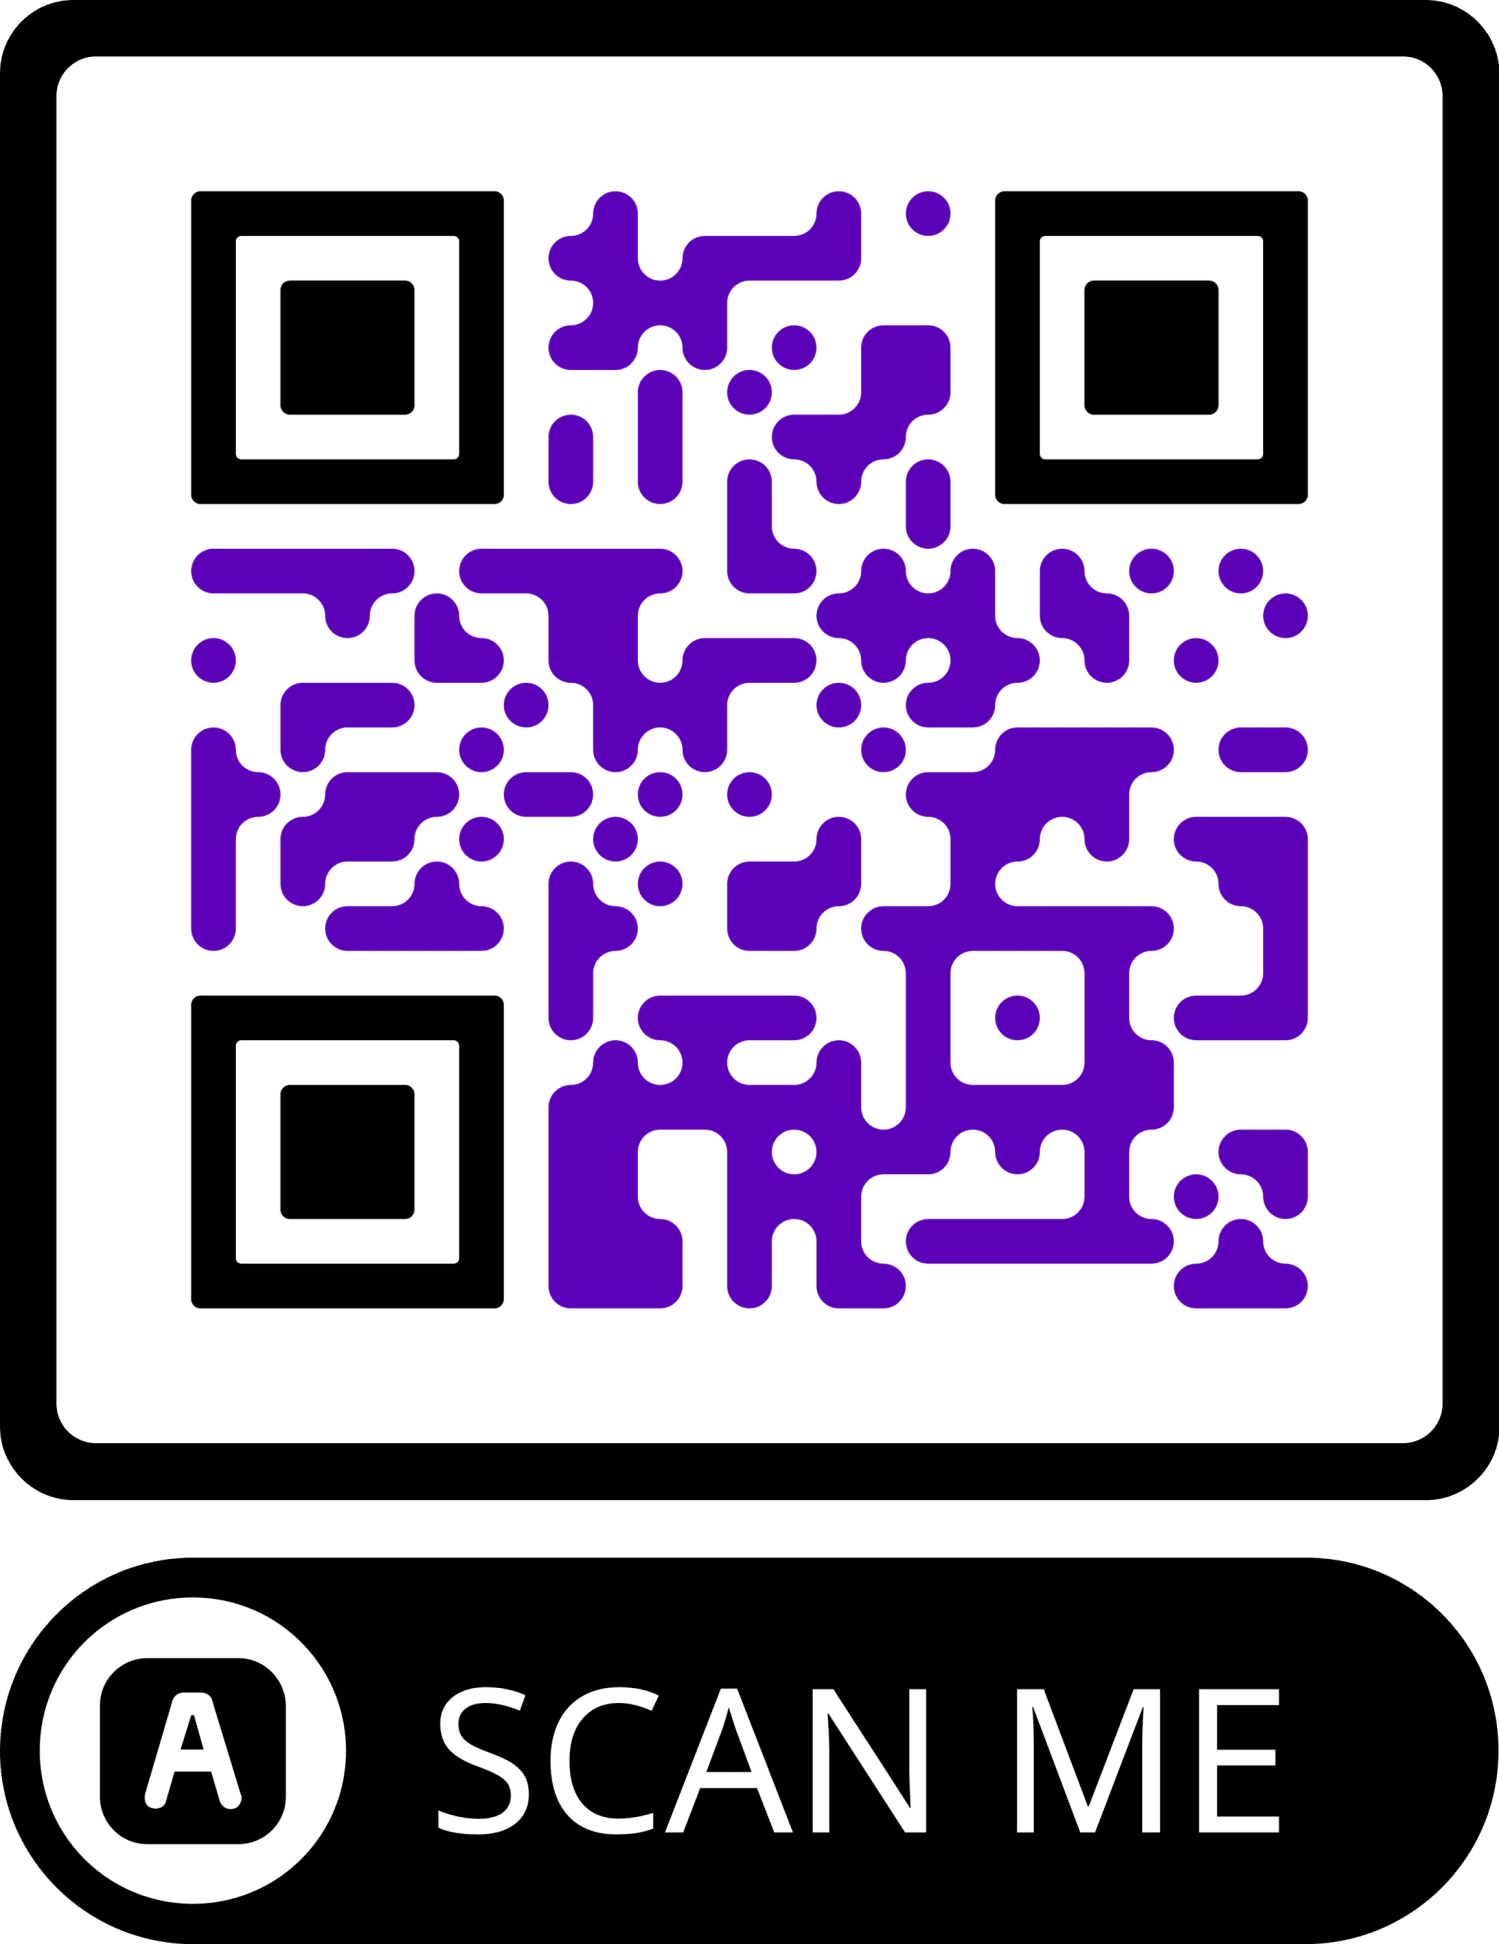 QR code which, when scanned, opens a webpage from where you can download the app.